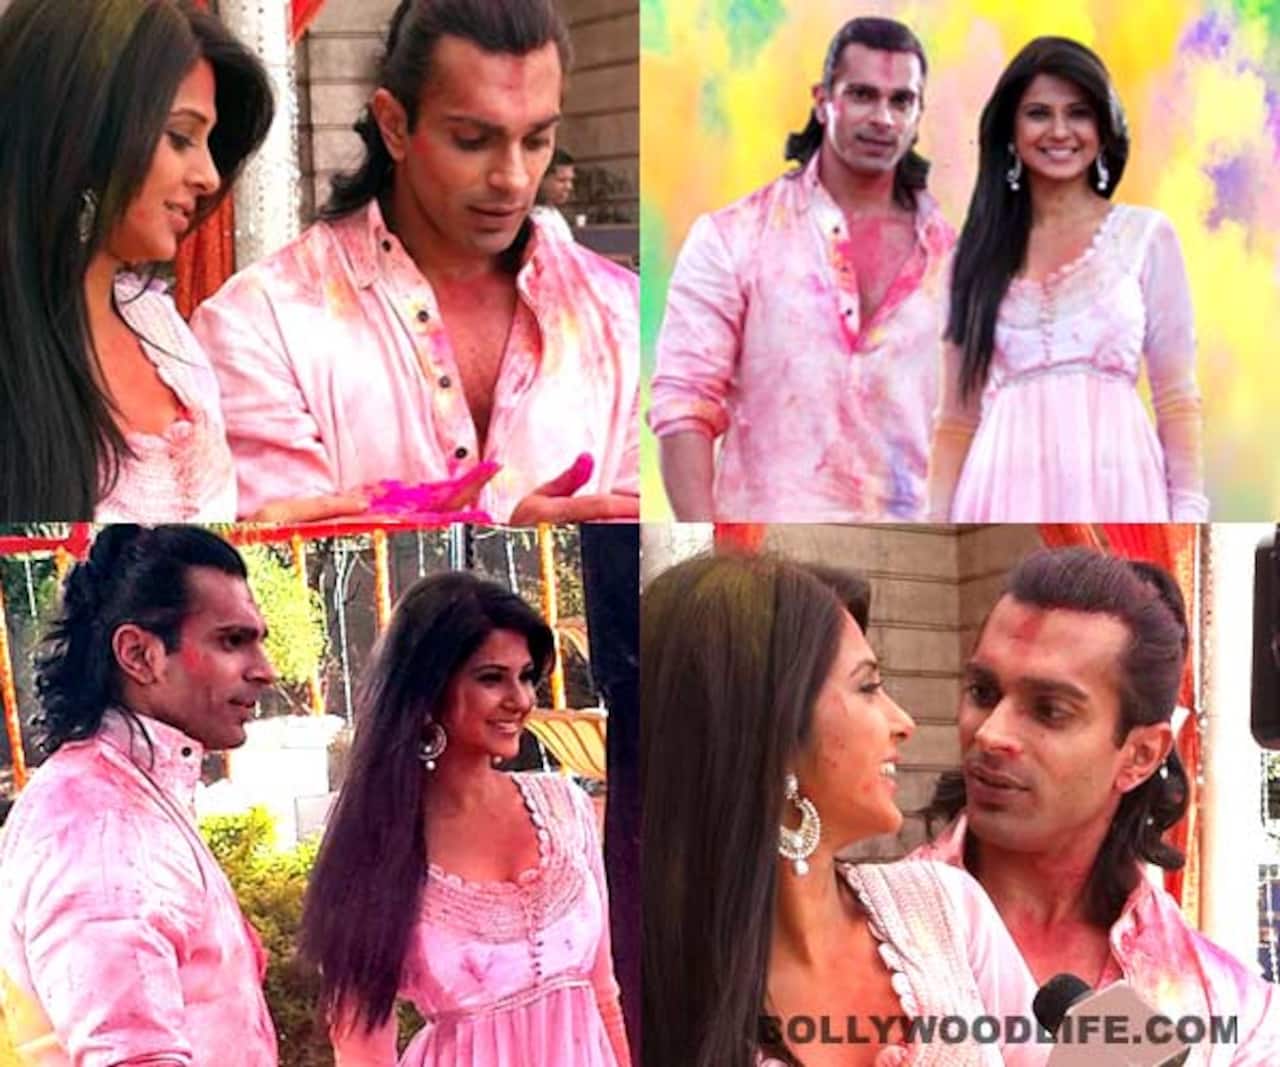 Post Qubool Hai, Karan Singh Grover returns to television with Jennifer  Winget - Bollywood News & Gossip, Movie Reviews, Trailers & Videos at  